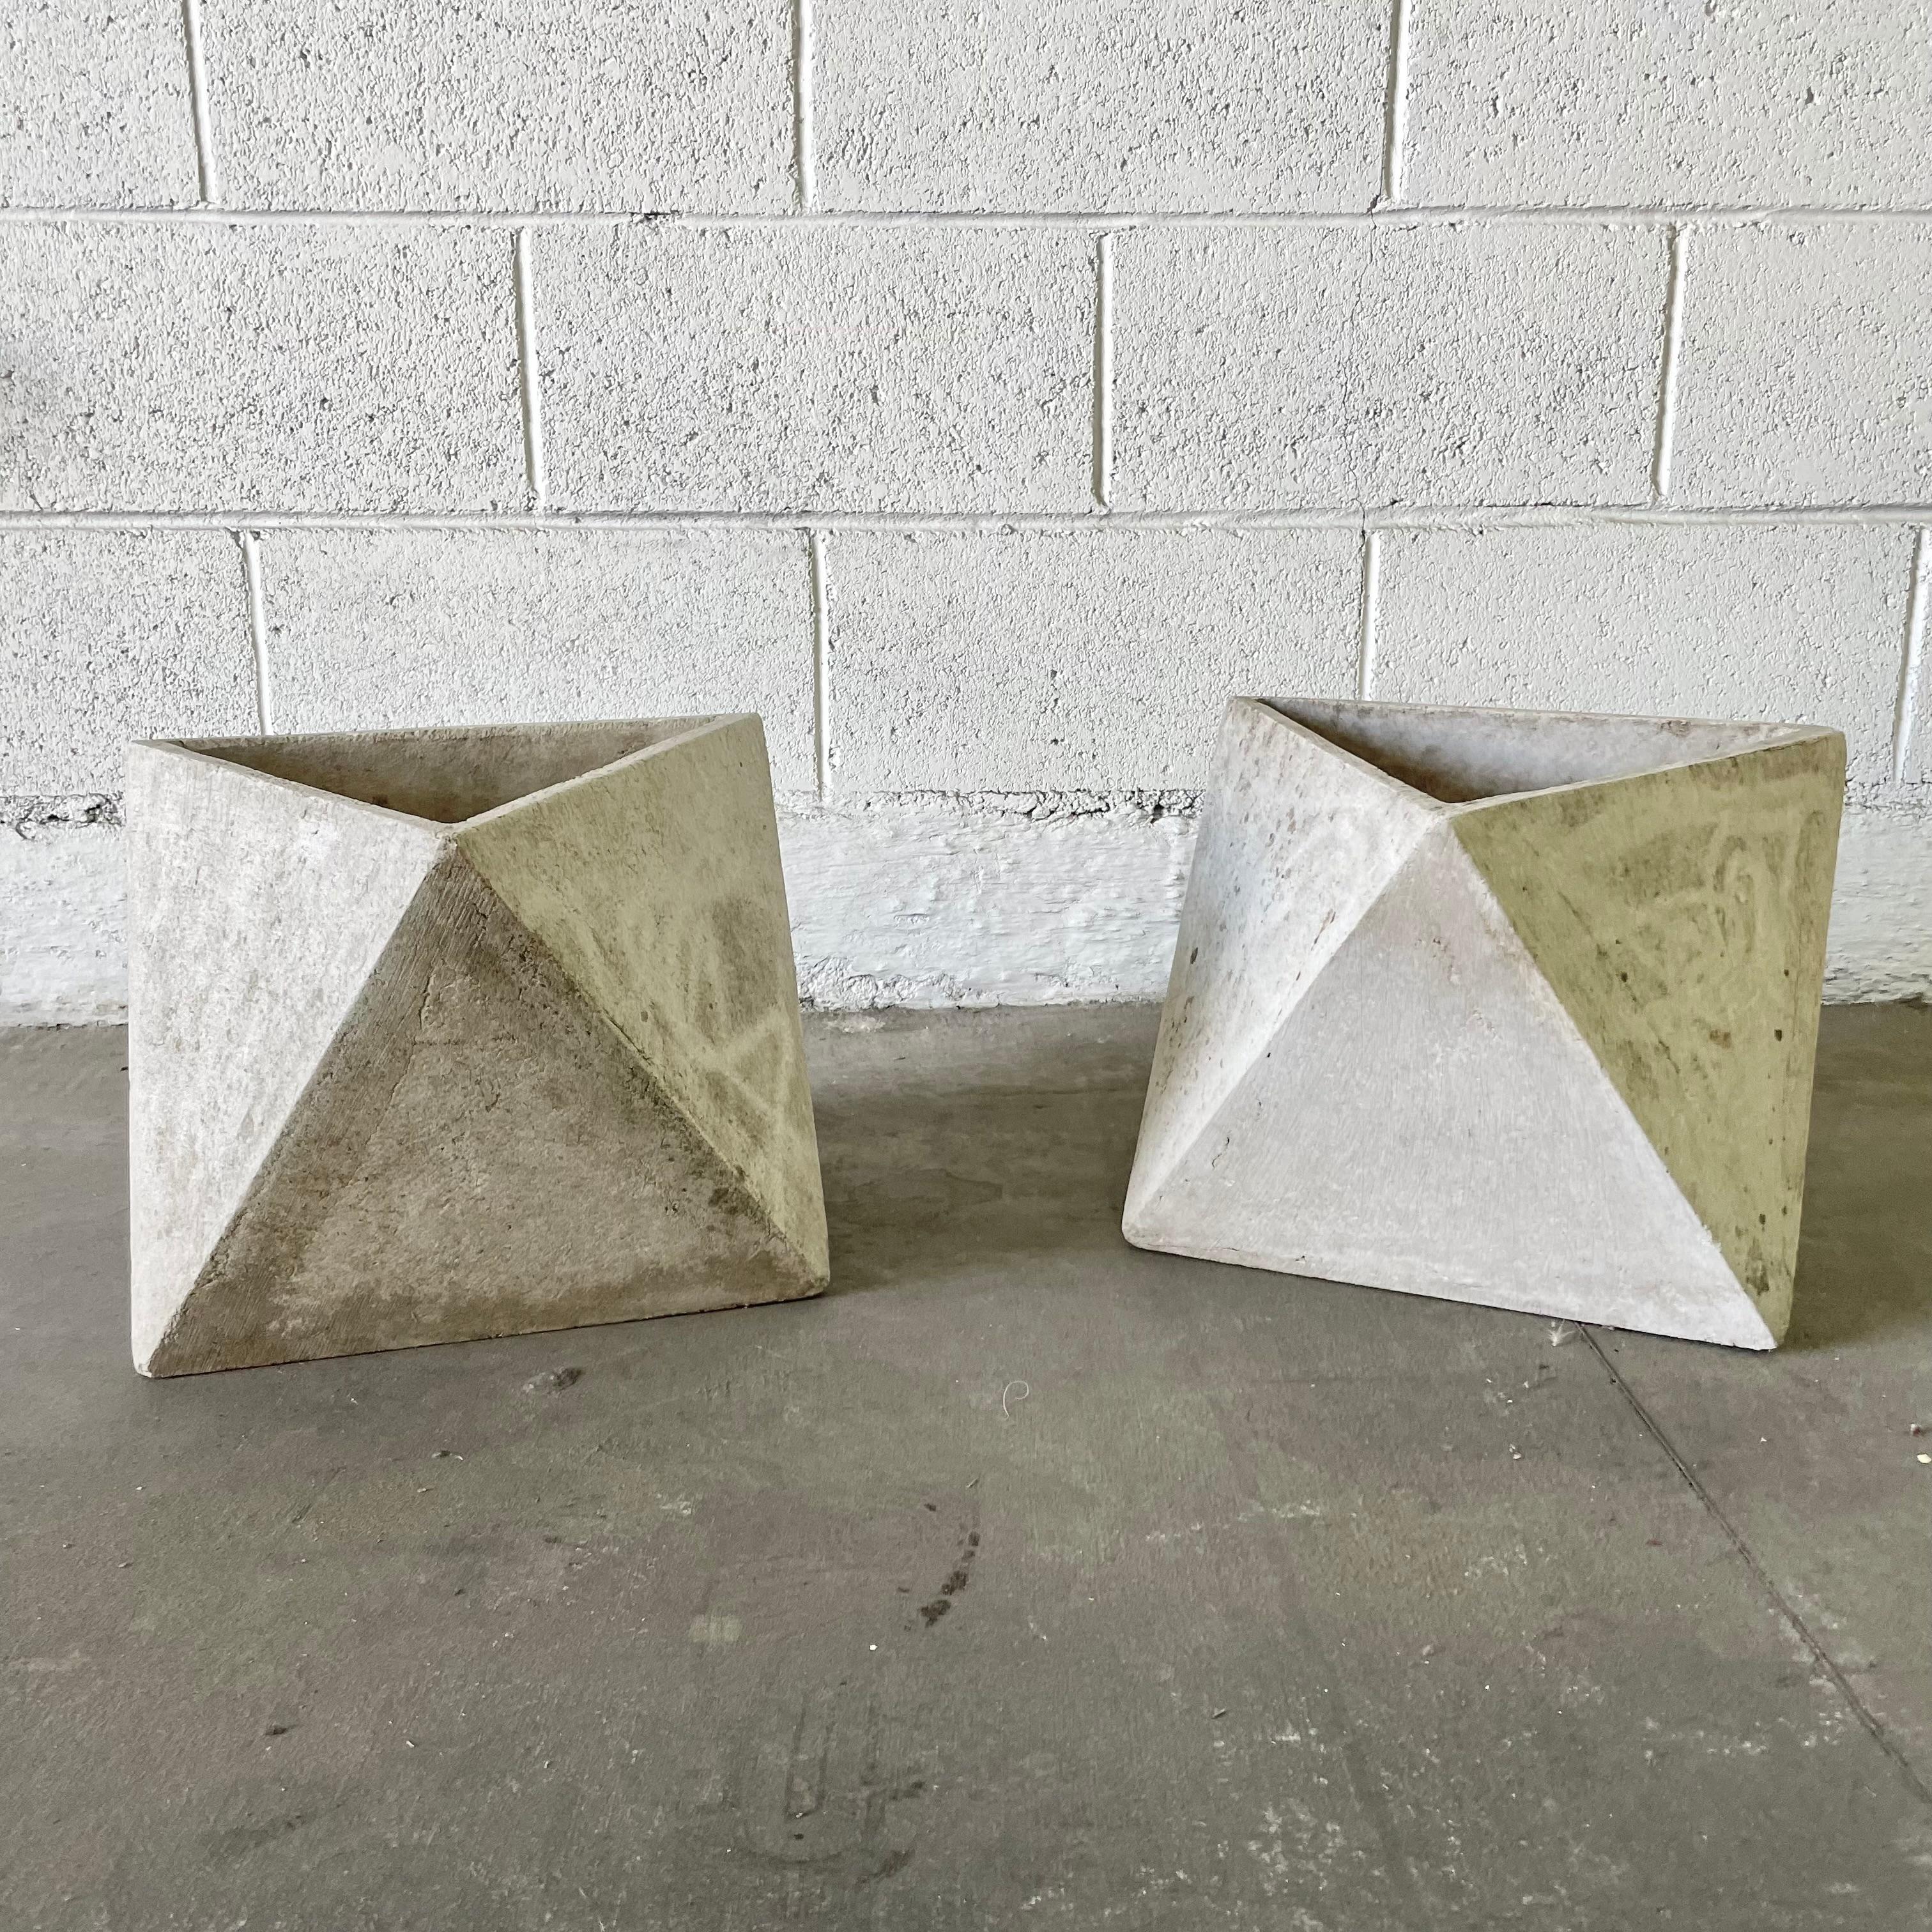 Unique triangular concrete planter by Swiss Architect Willy Guhl. Different sides of the planters can be used as the base giving great versatility and style. 7 sided. Gorgeous detail. Excellent patina and age to concrete. Gorgeous sculpture for